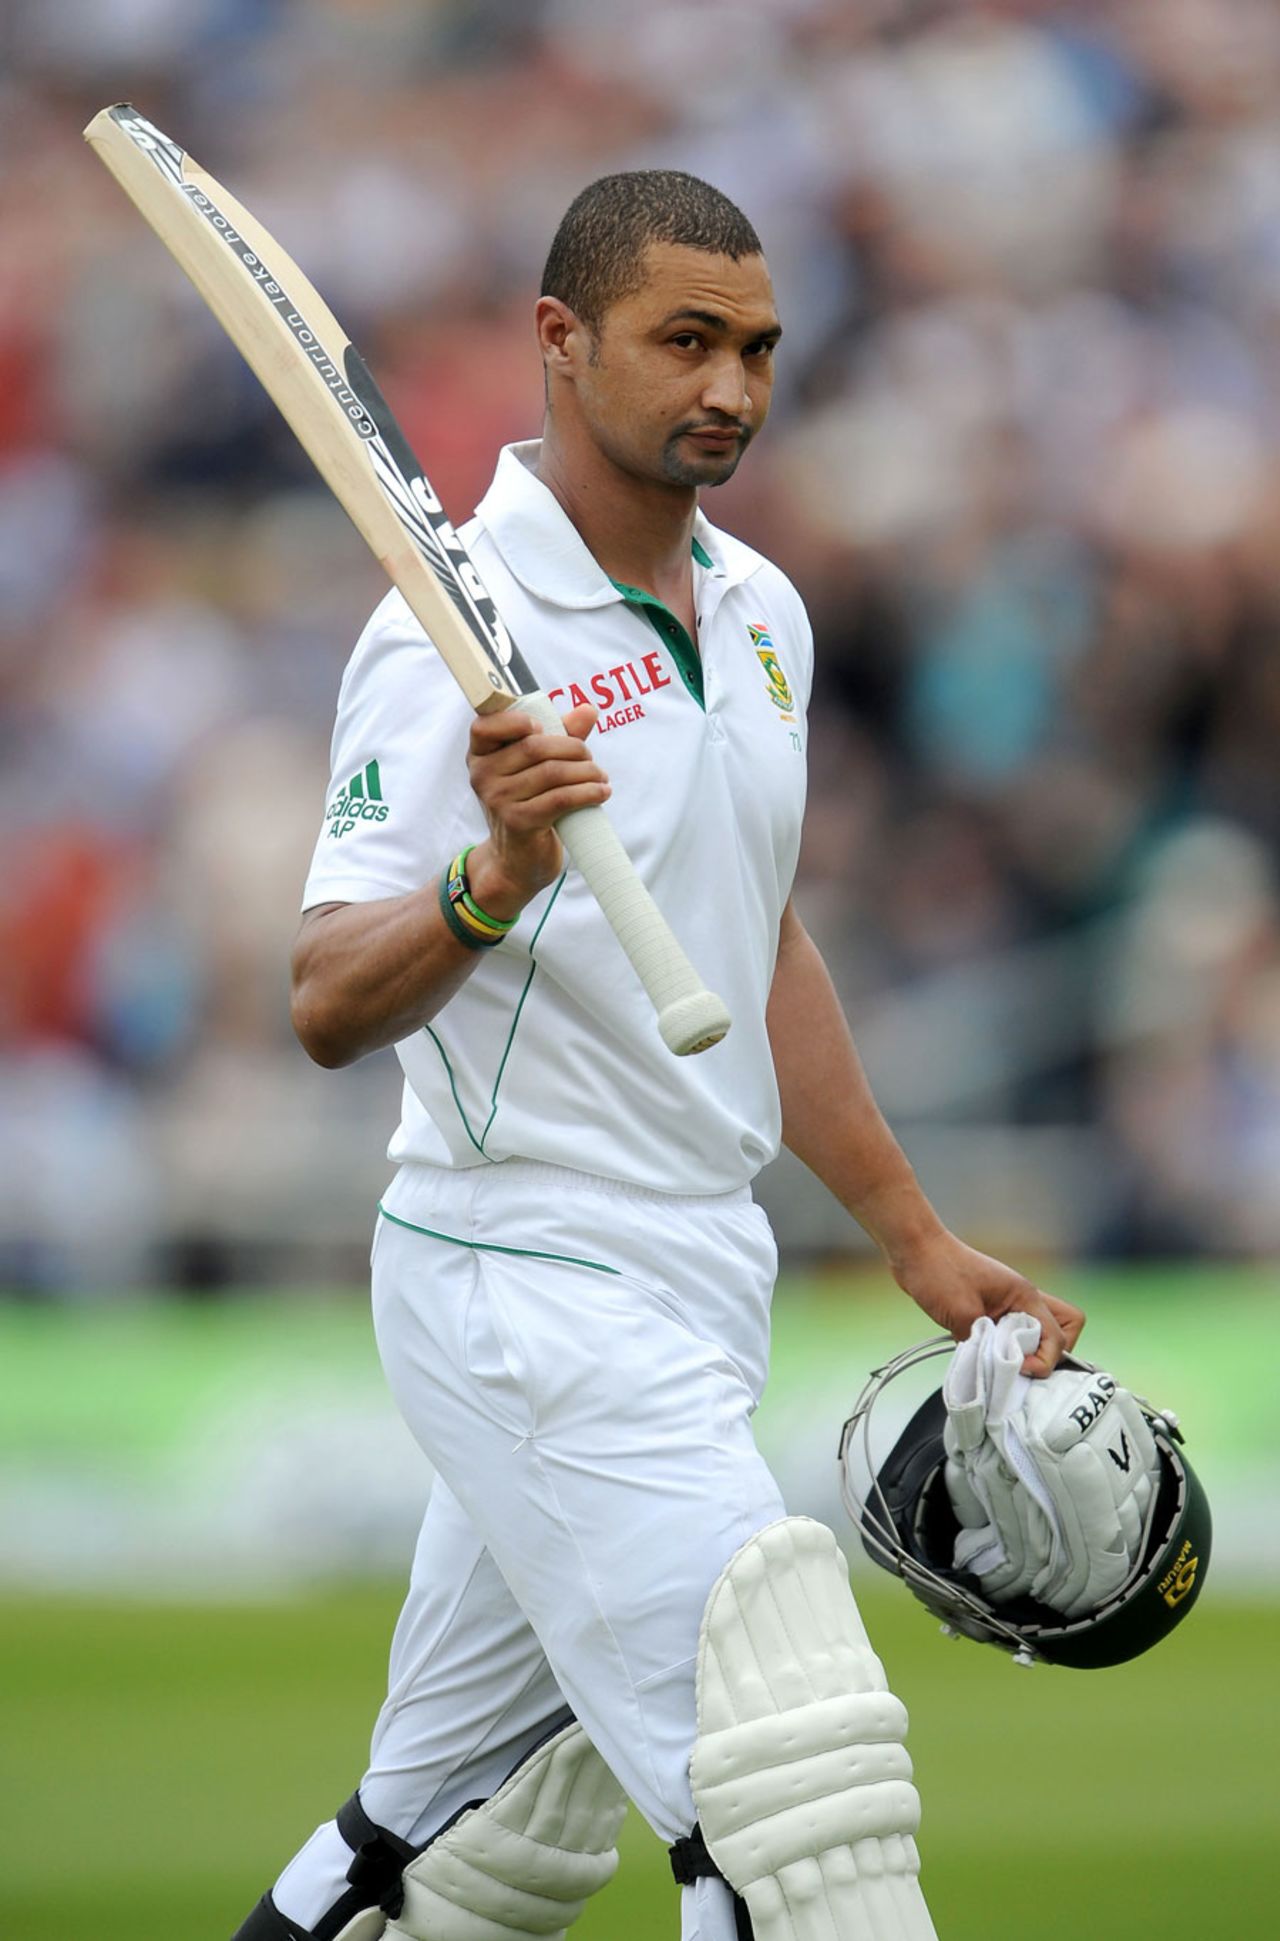 Alviro Petersen made his highest Test score of 182, England v South Africa, 2nd Investec Test, Headingley, 2nd day, August 3, 2012